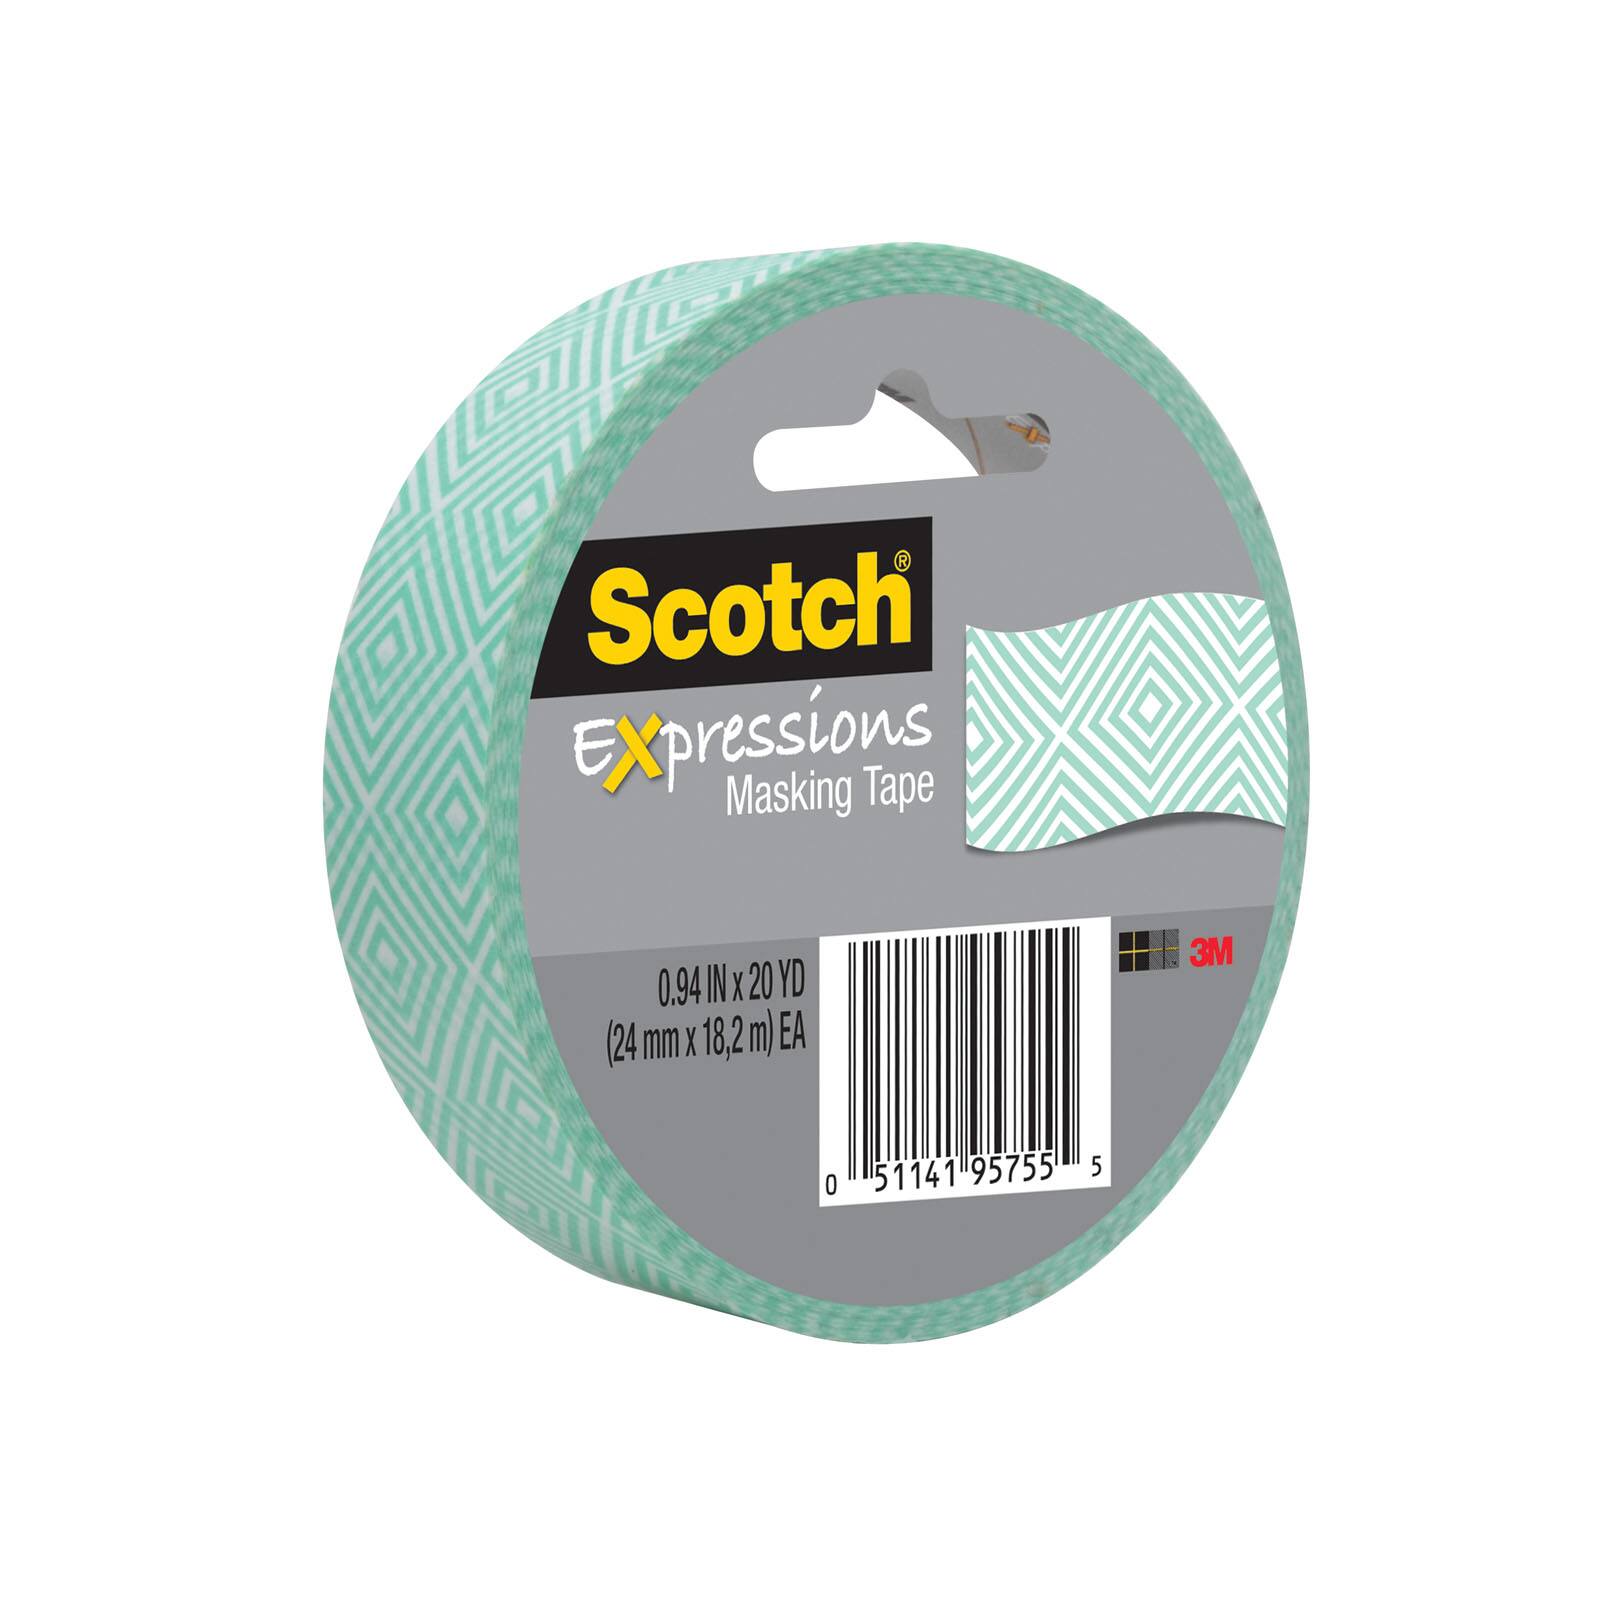 Shop For 3m Scotch Expressions Masking Tape Mint Mosaic At Michaels